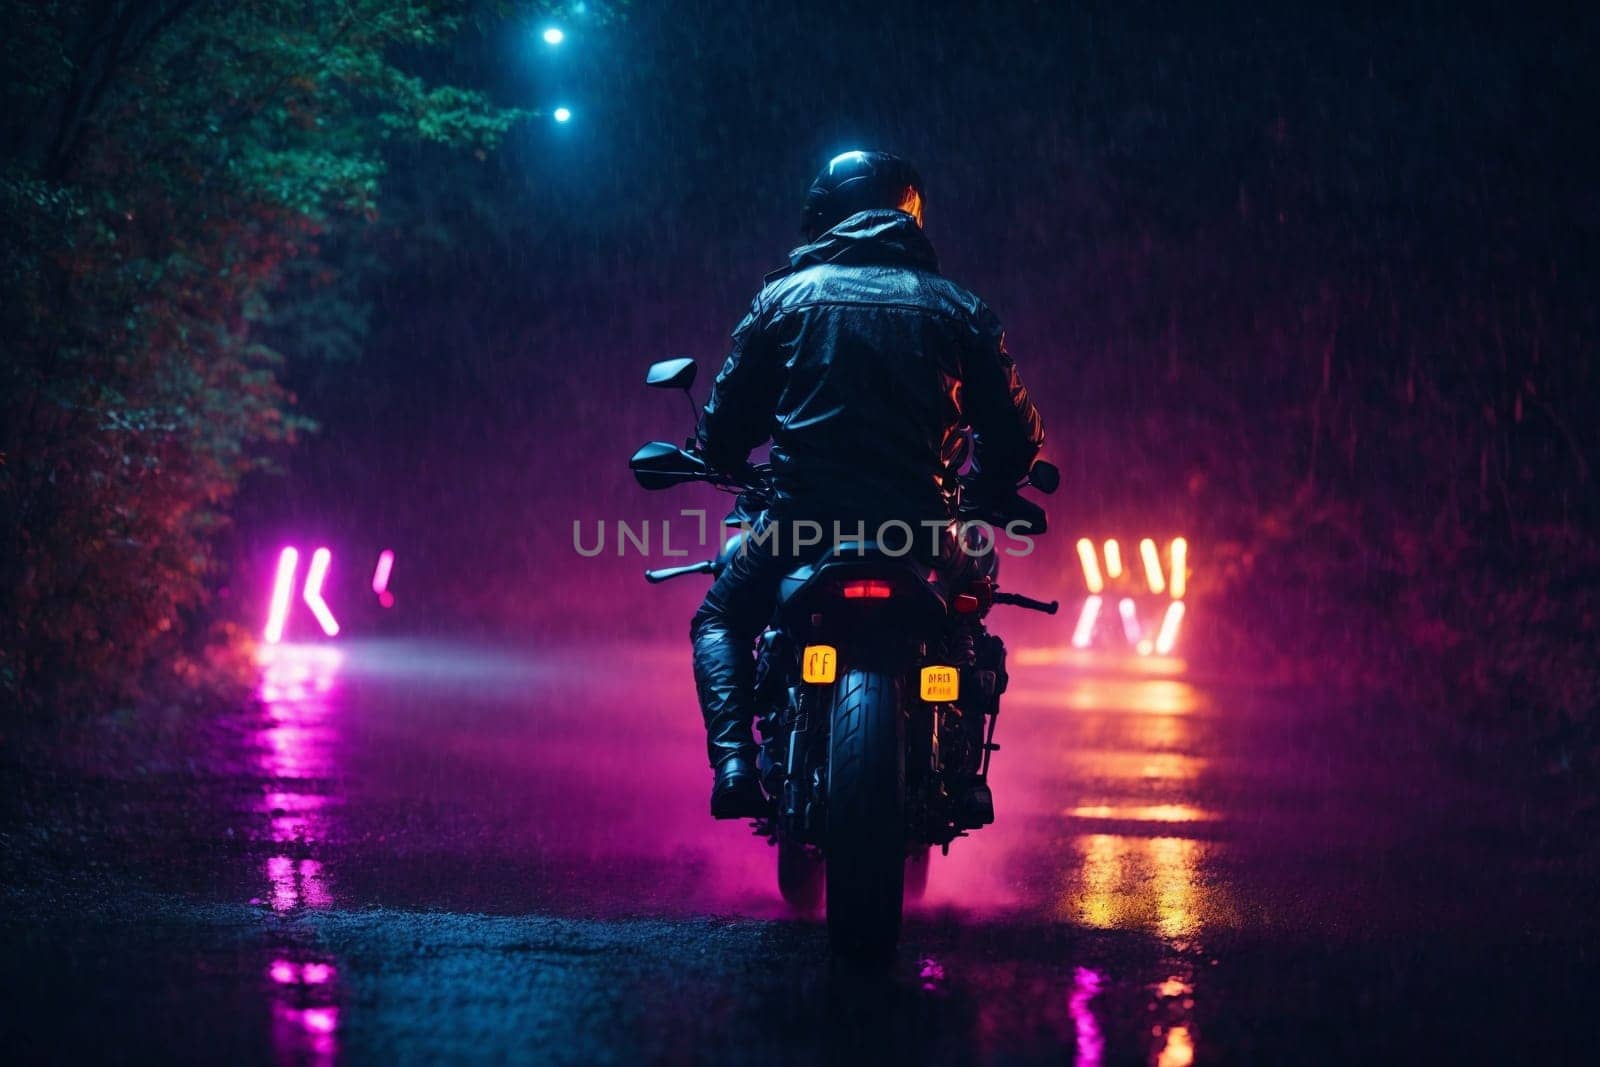 A person confidently rides a motorcycle on a wet road, skillfully navigating the challenging conditions.